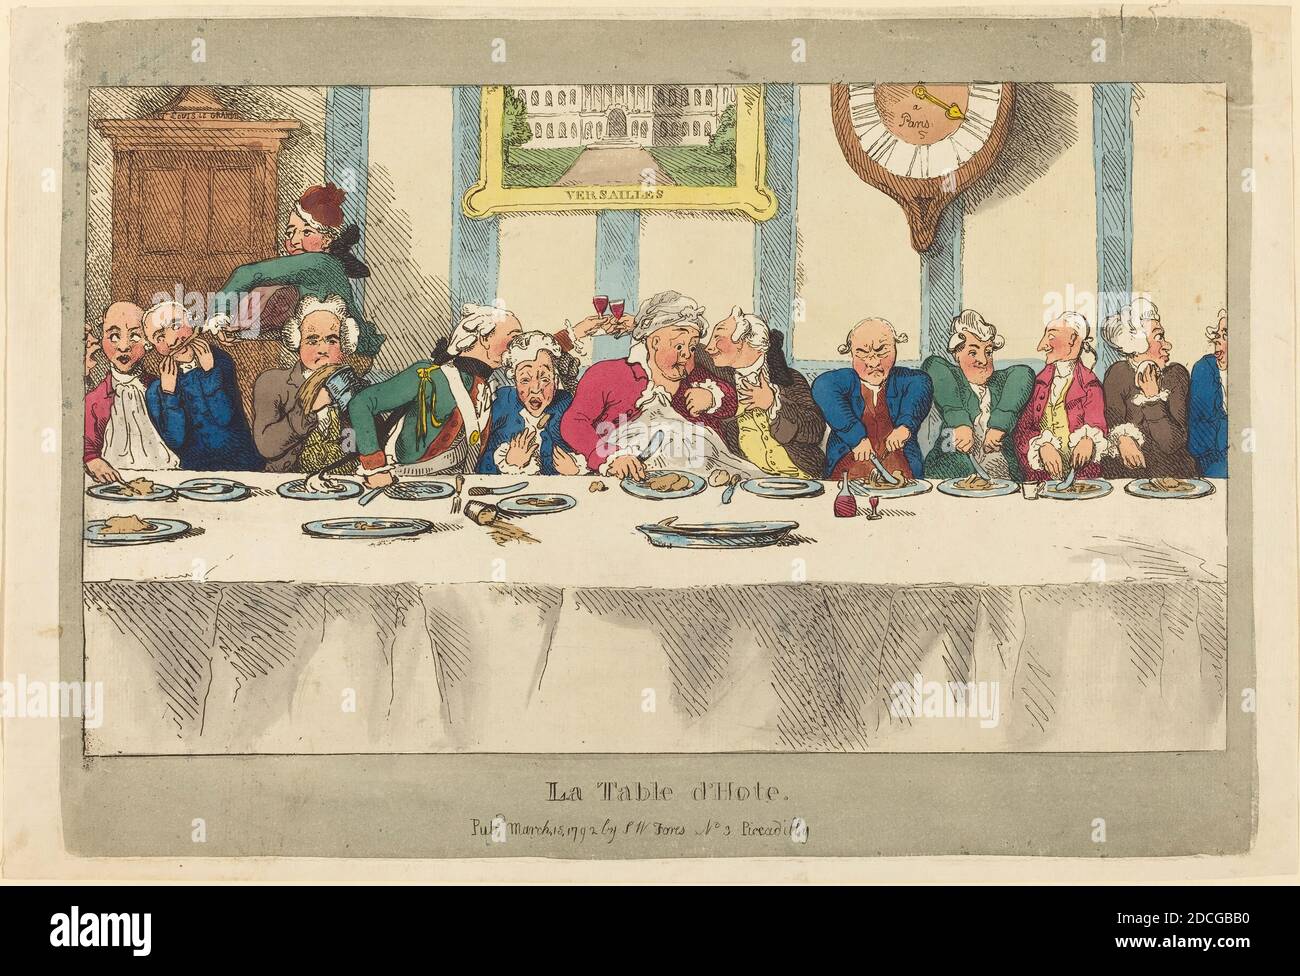 Thomas Rowlandson, (artist), British, 1756 - 1827, La Table d'Hote, published 1792, hand-colored etching Stock Photo